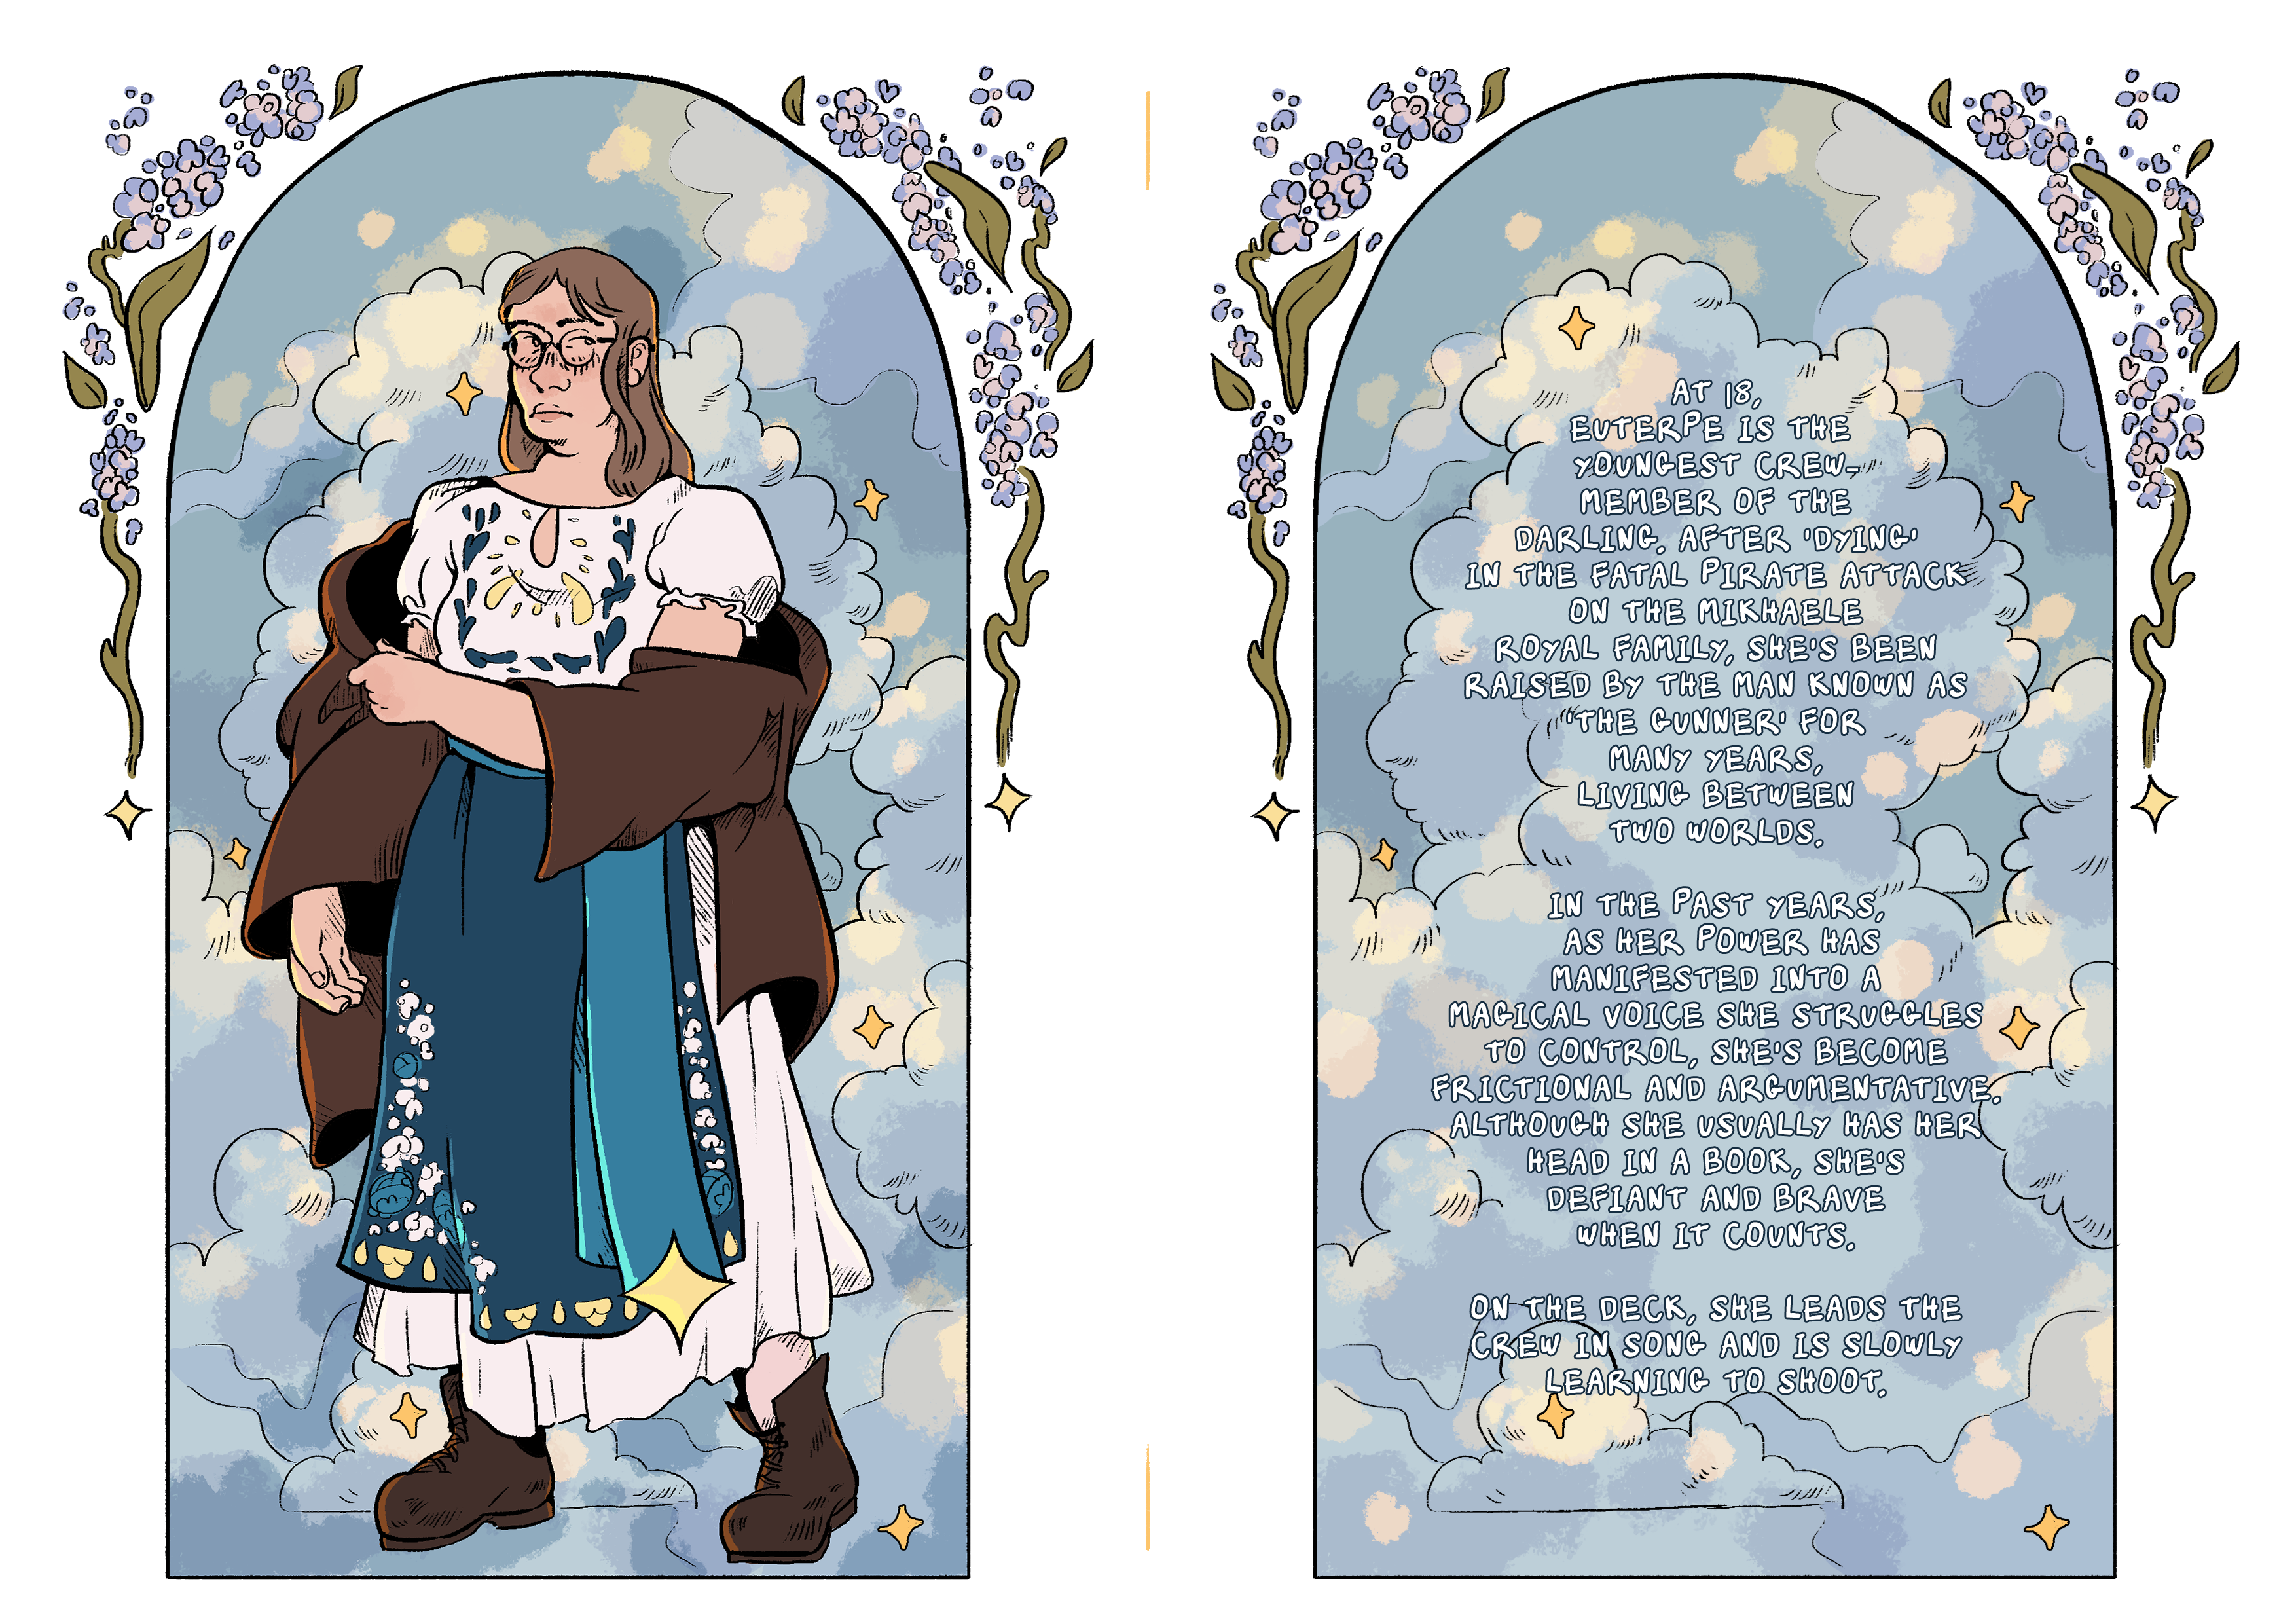 A full-body digital illustration of a young White woman in traditional Eastern European-inspired folk dress in blue and an oversized brown jacket. Behind her is a arch frame full of blue clouds, with details of stars and flowers on the edge of the frame. In the other half of the image, there's the same frame, full of text explaining her backstory.